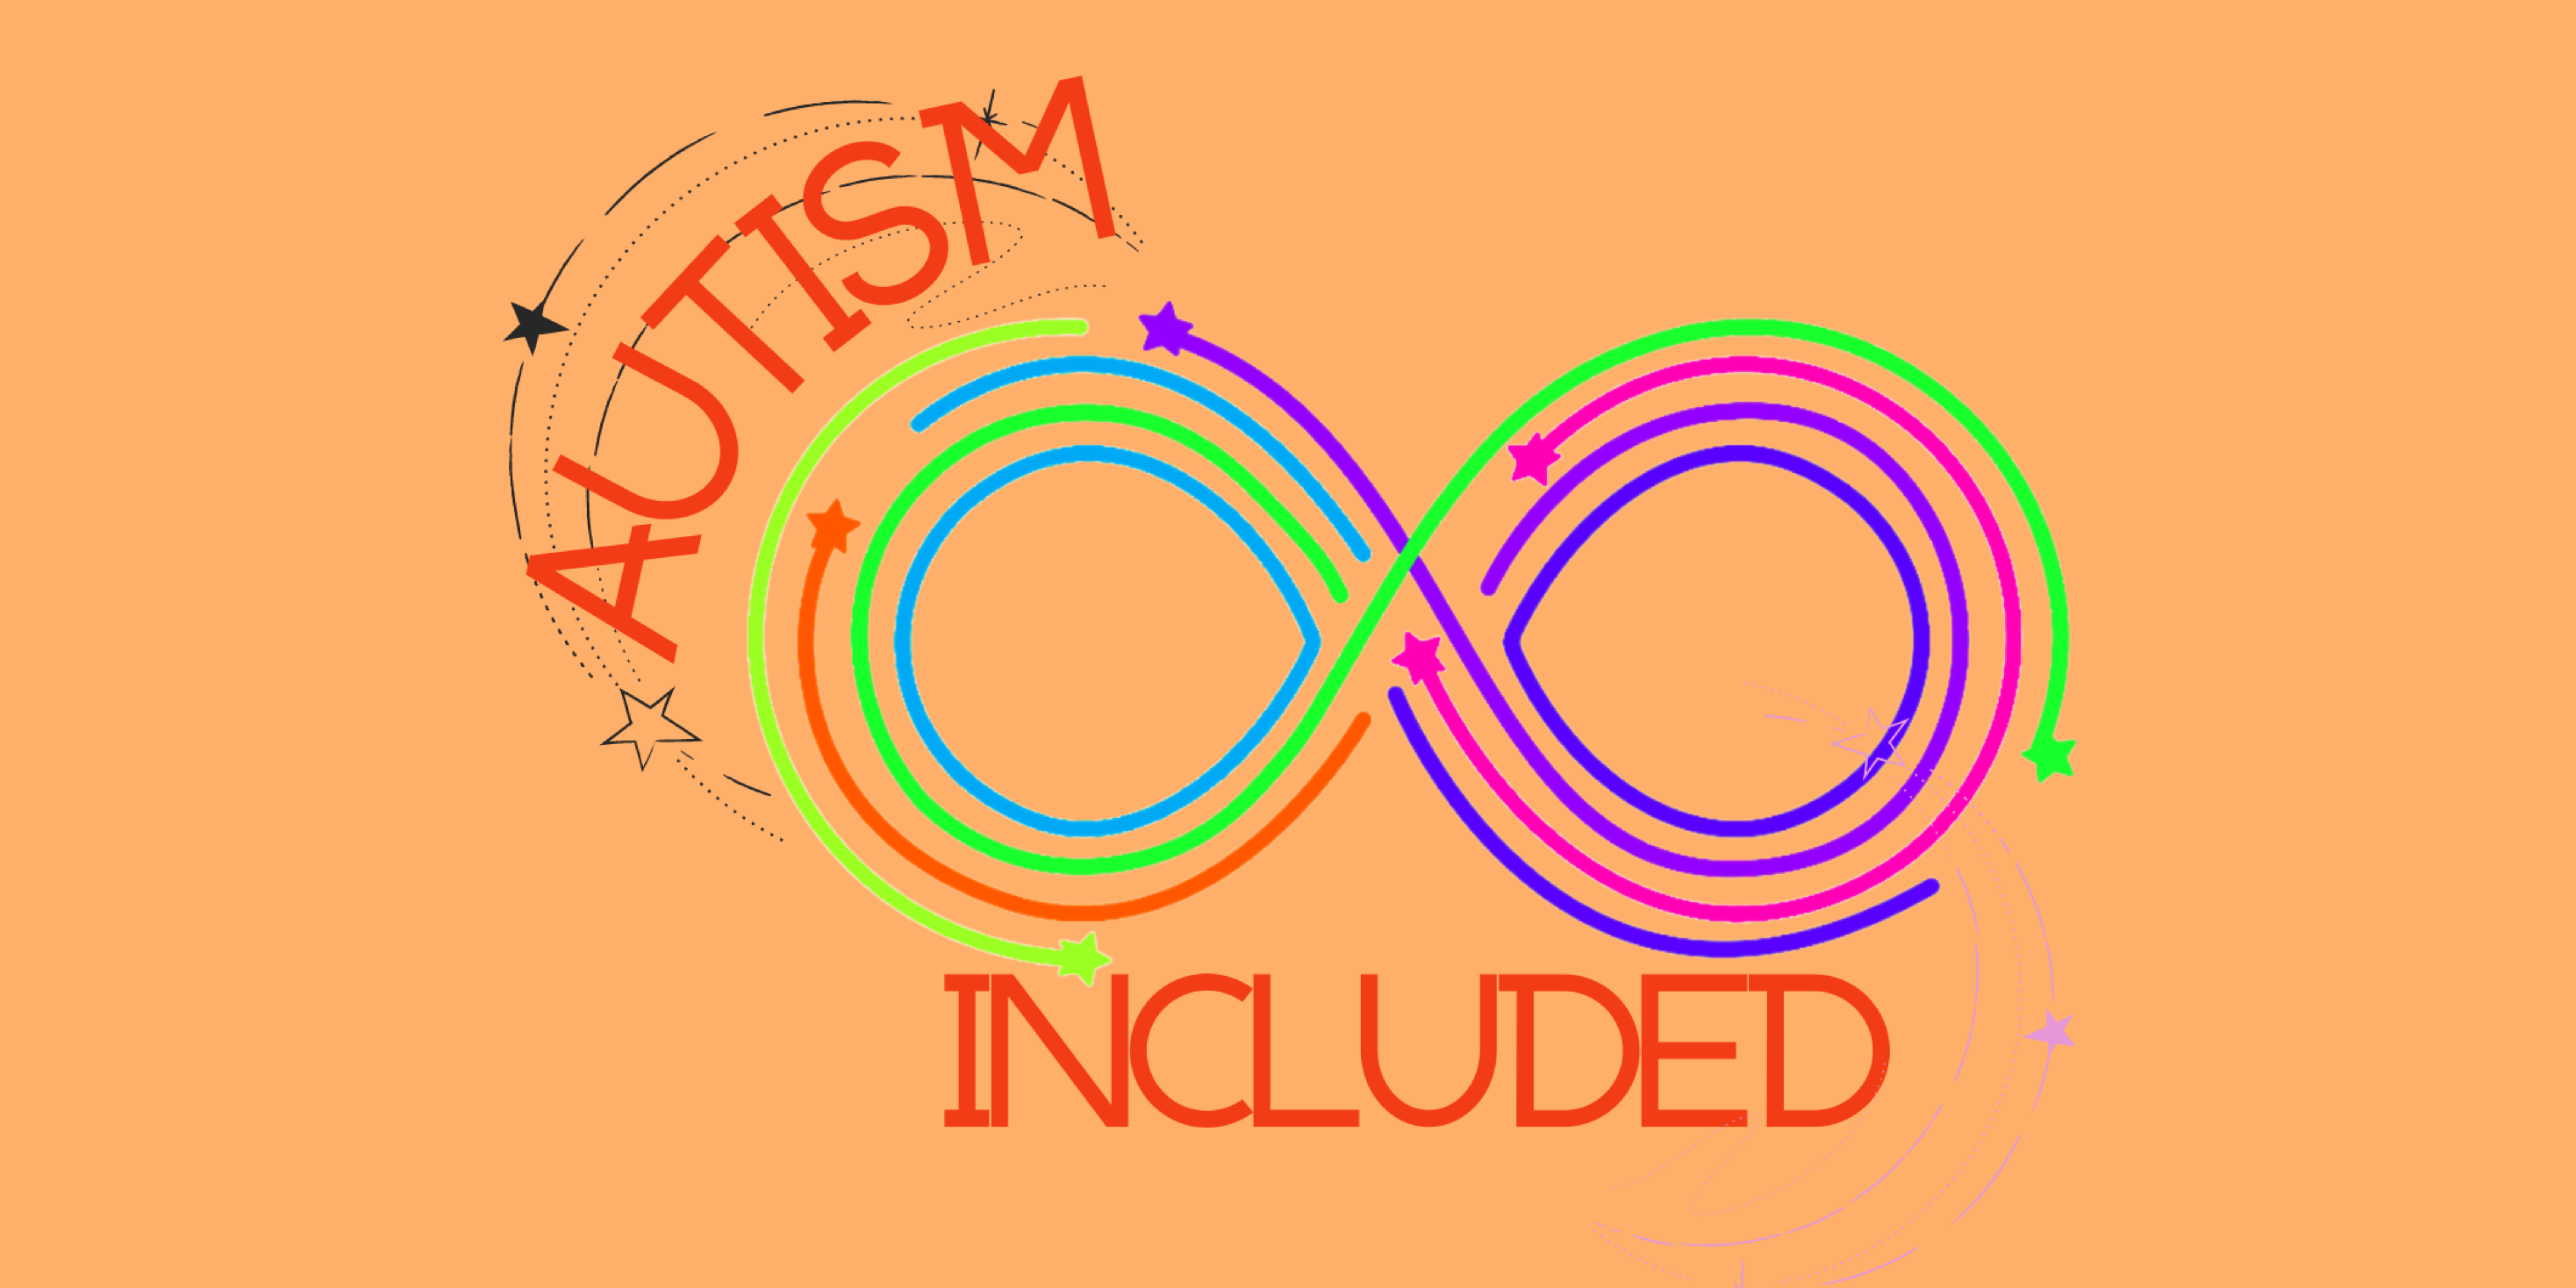 Rainbow colored infinity logo with text autism included